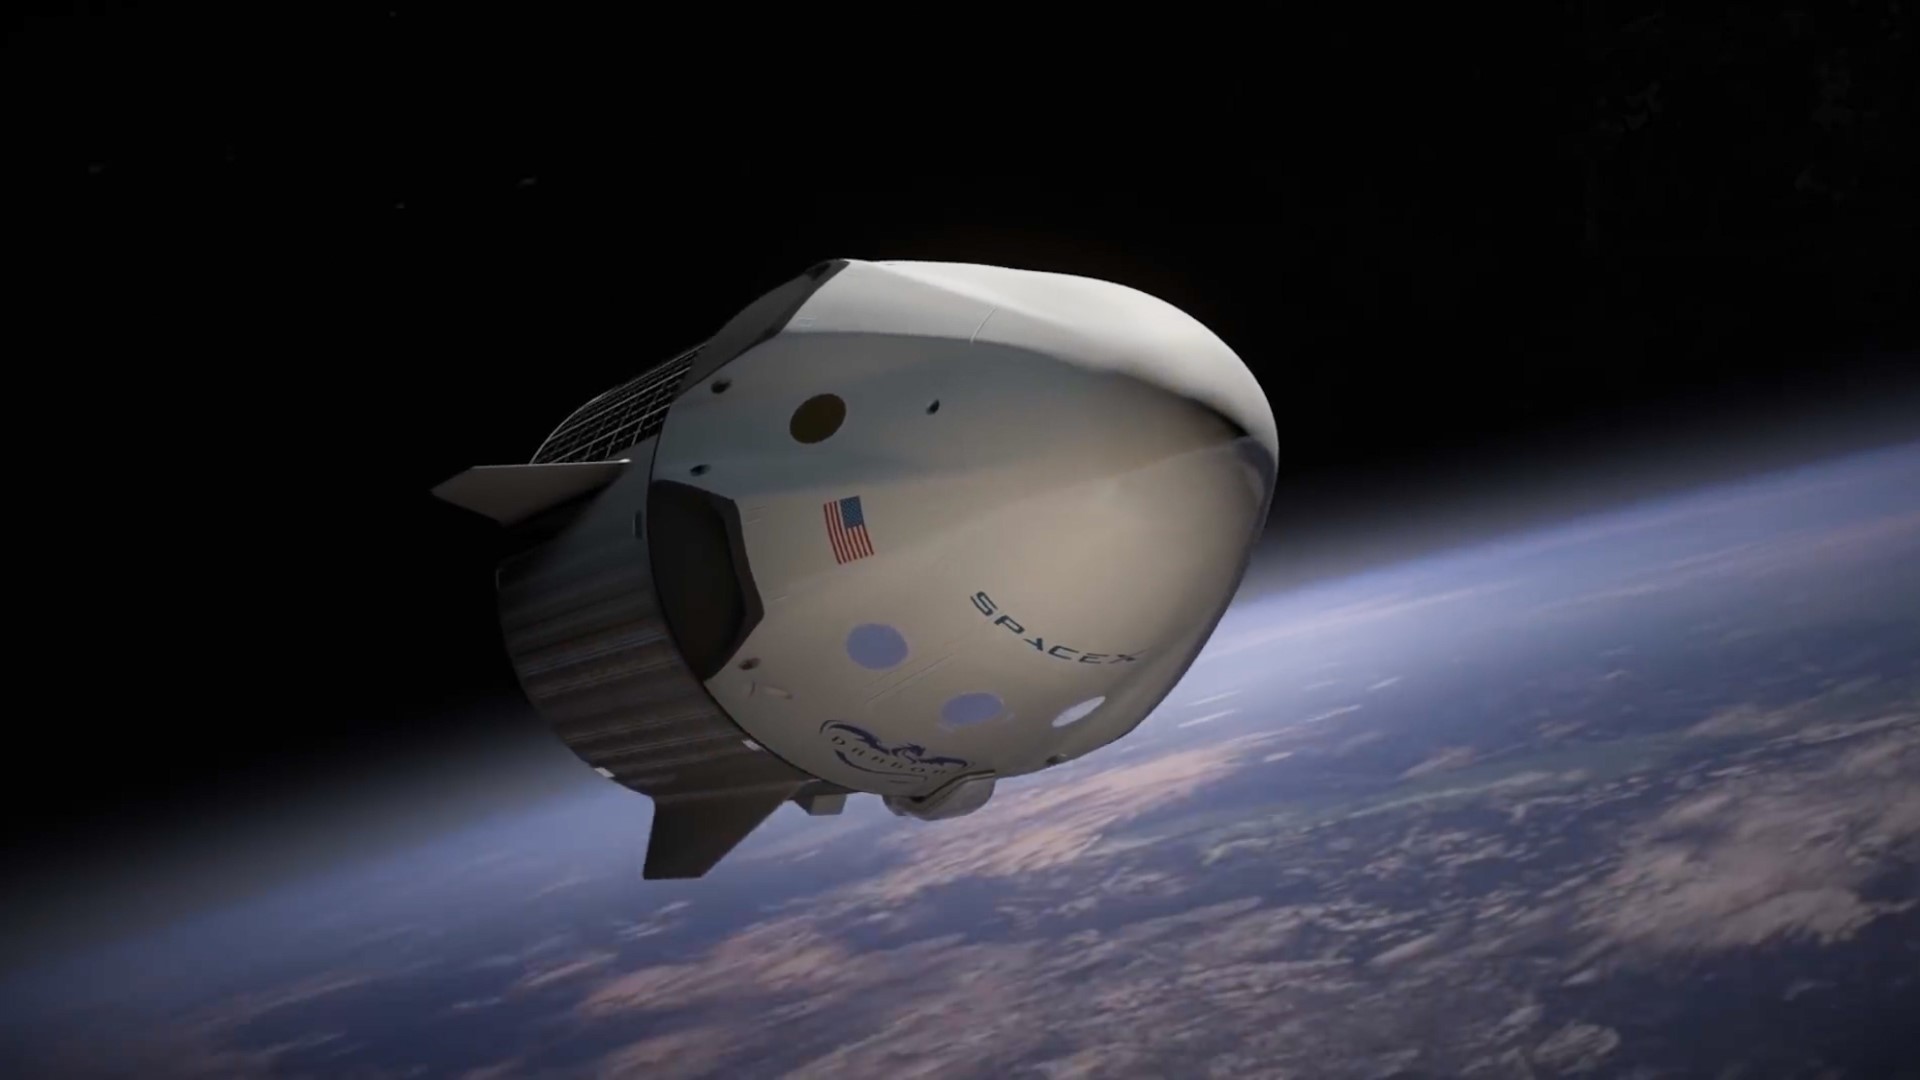 NASA astronauts Bob Behnken and Doug Hurley will head to the International Space Station on the Crew Dragon Demo-2 mission, SpaceX's first manned test flight. It will be the first time an American spacecraft carries NASA astronauts since the Space Shuttle program ended in 2011.